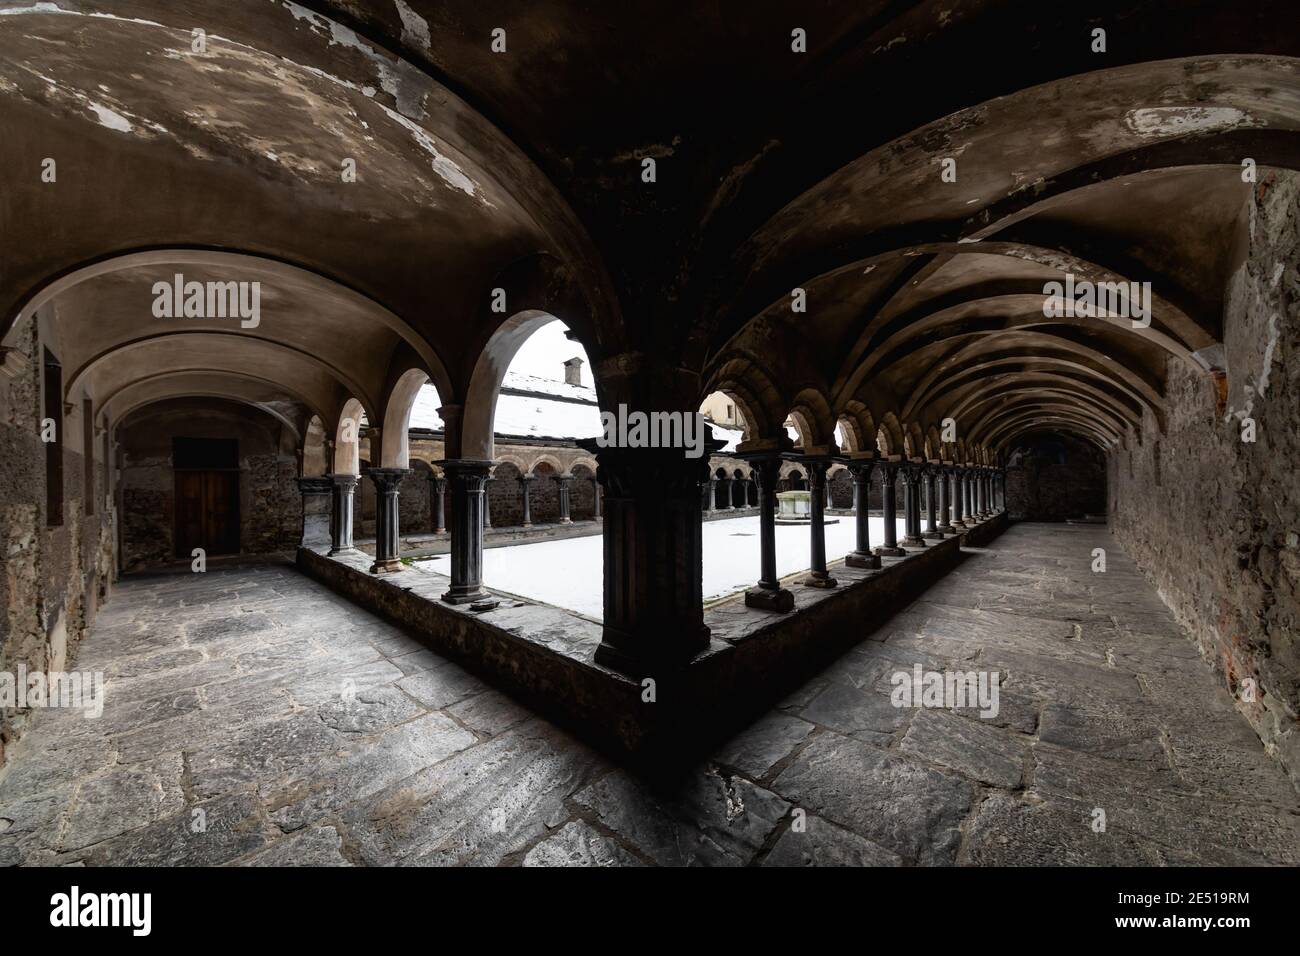 Wide angle symmetrical view of a northern Italian black stone medieval cloister, with round arches and paired columns Stock Photo